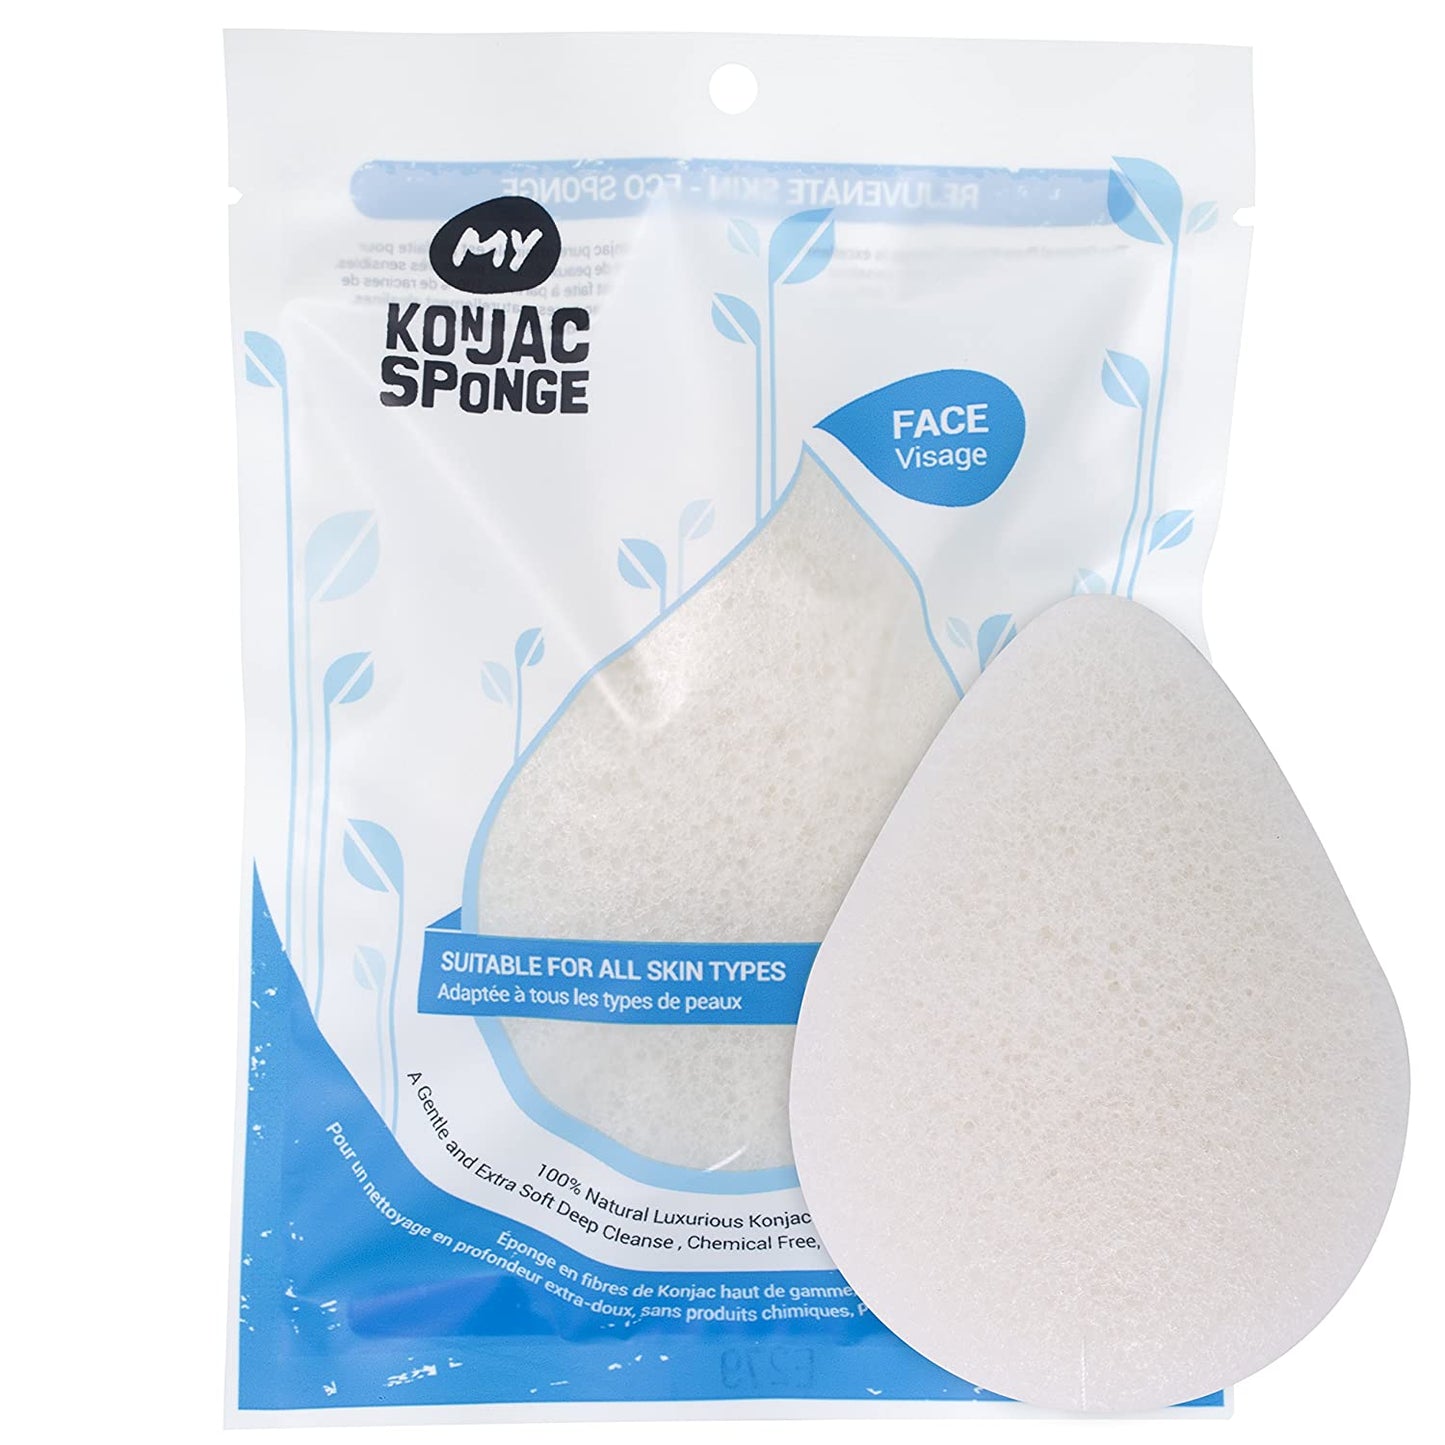 My Konjac Sponge - Six Wave: Experience the Textured Difference for a Spa-Like Clean